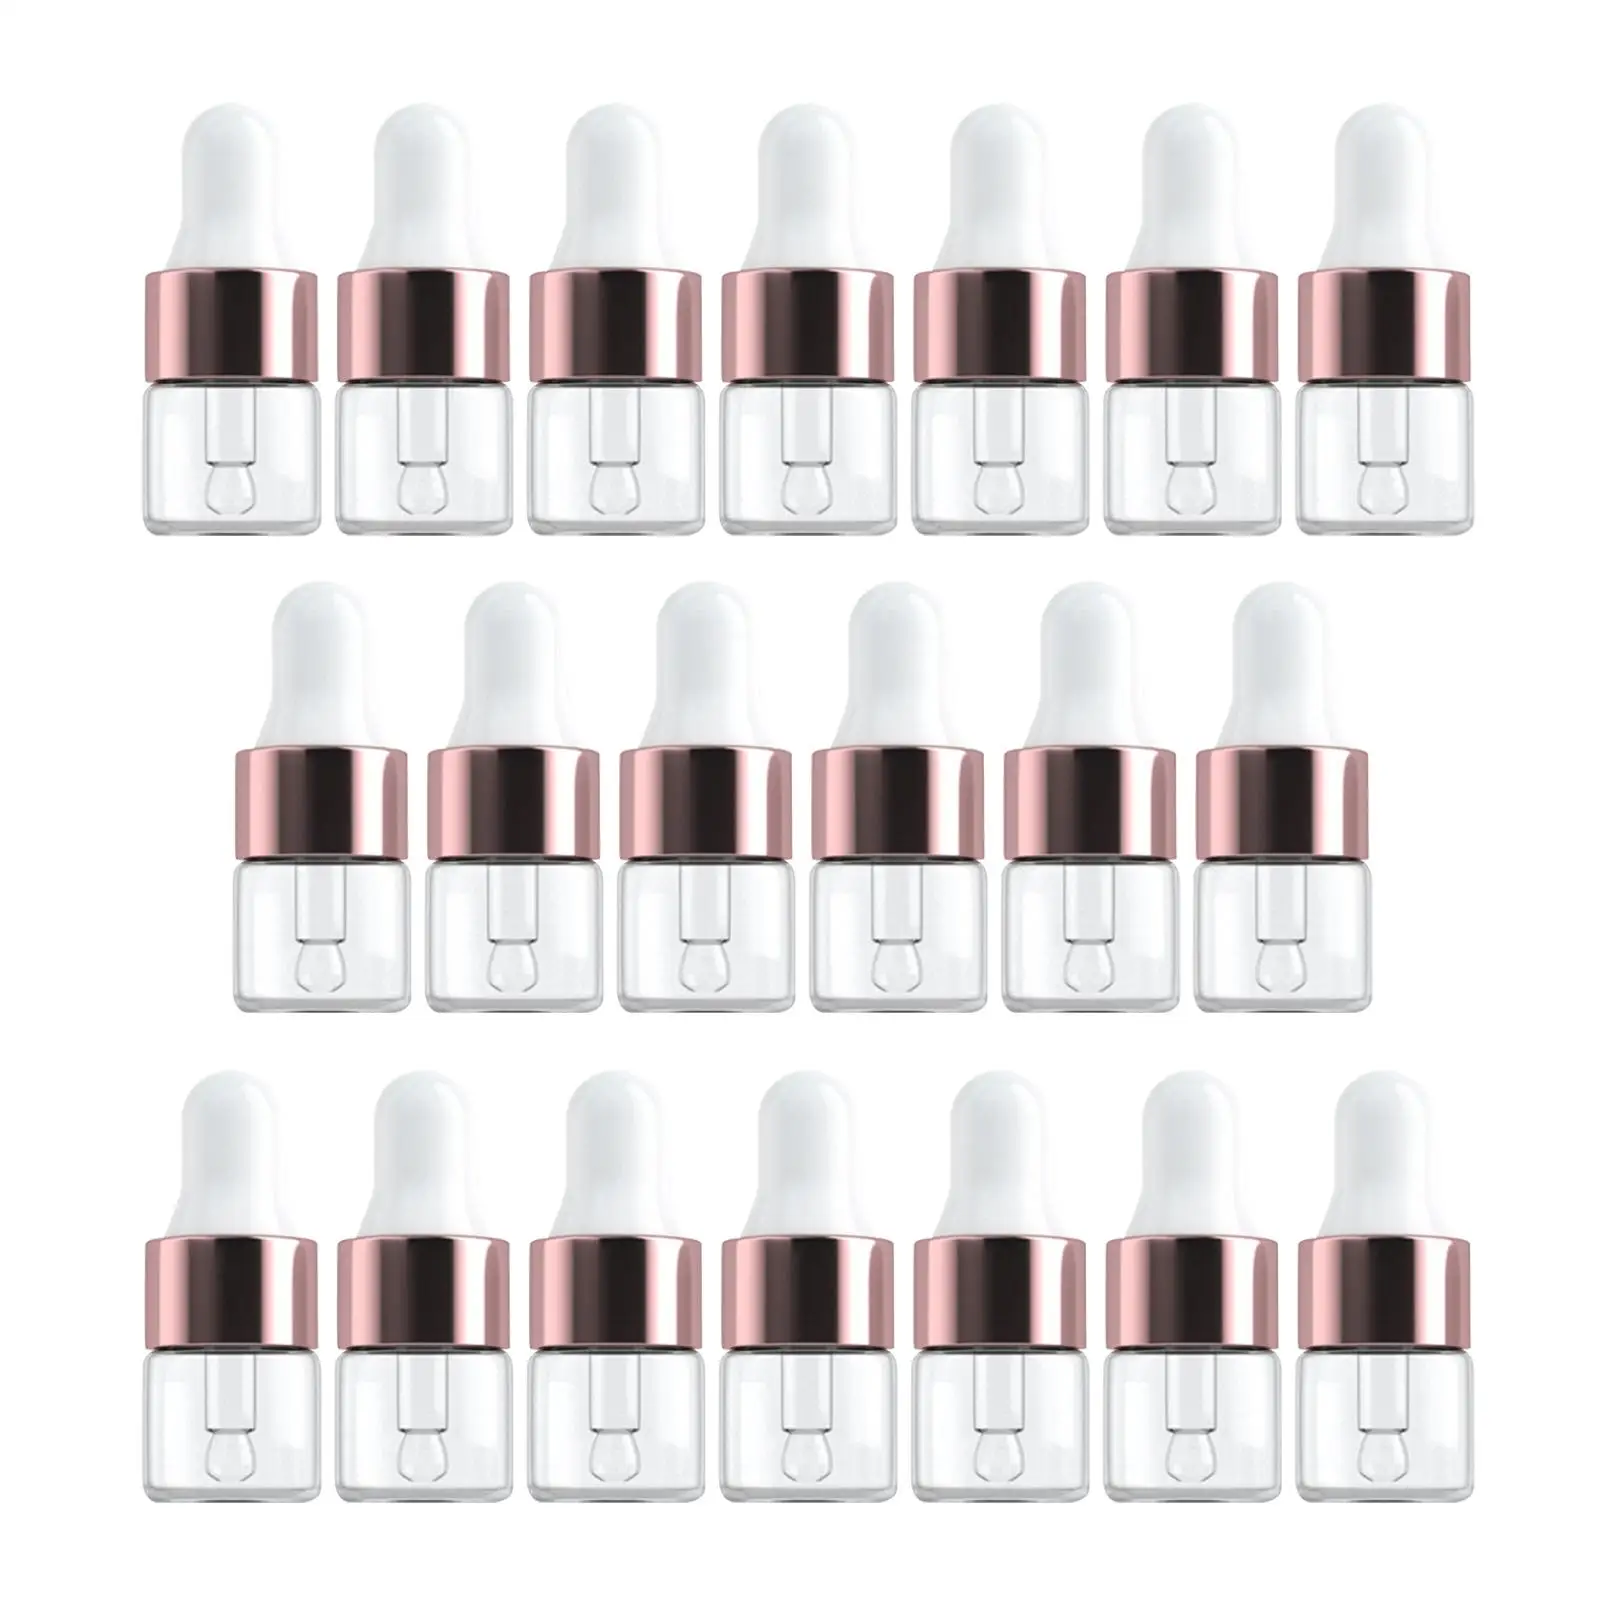 20Pcs Dropper Bottles with Caps Tip Applicator Containers Dropper Essential Oil Bottles for Eye Liquid Dropper Sample Travel